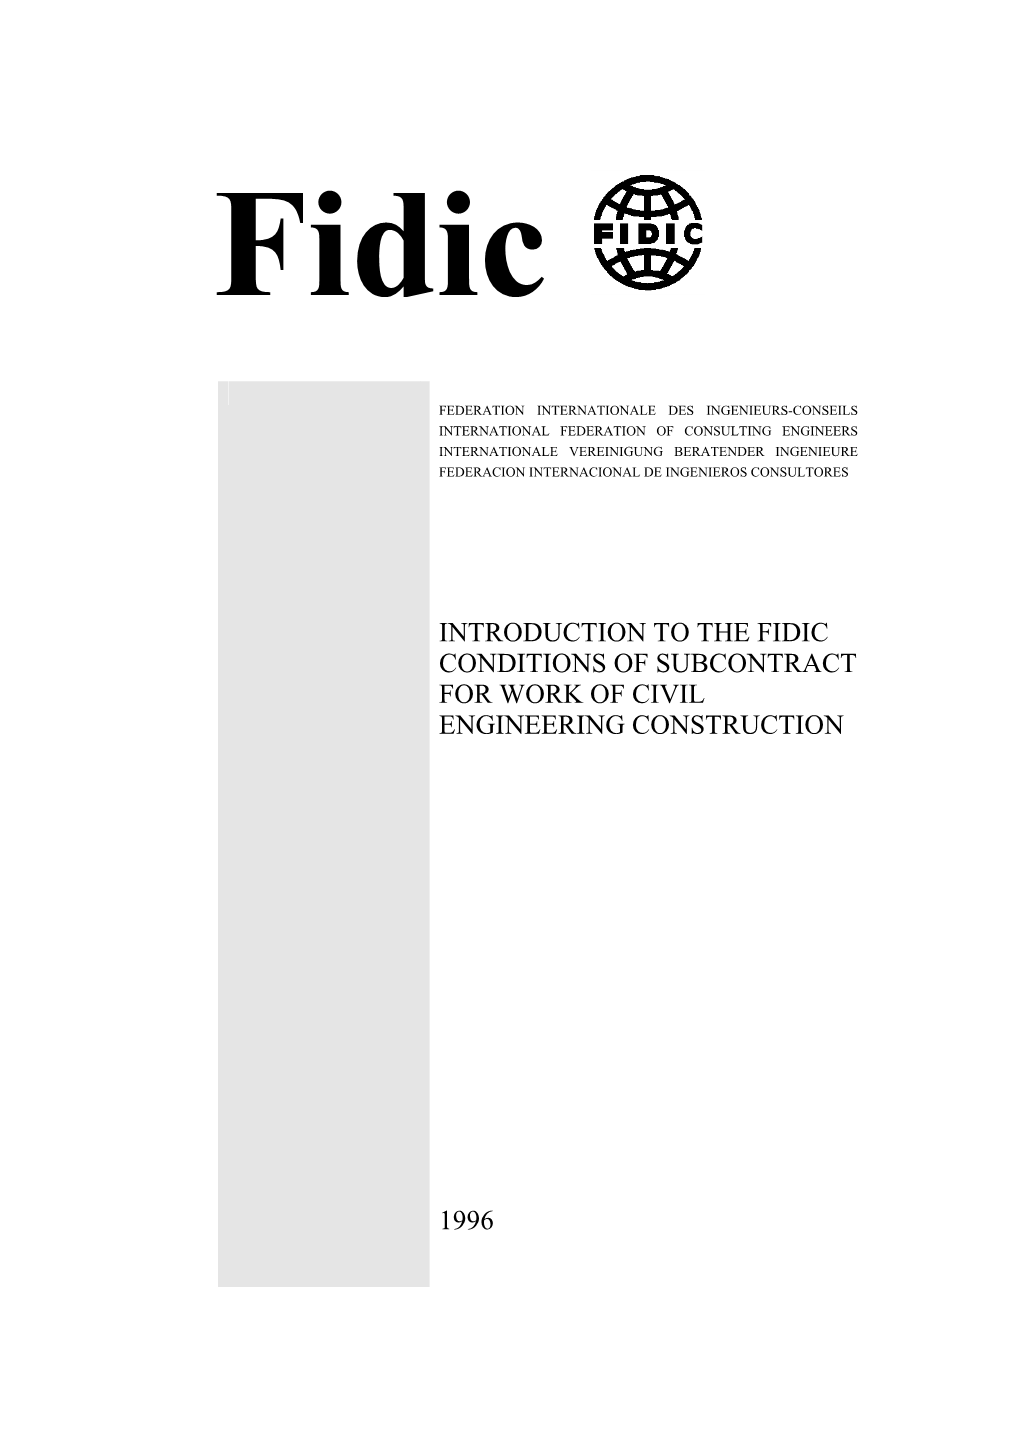 Introduction to the FIDIC Conditions of Subcontract for Works of Civil